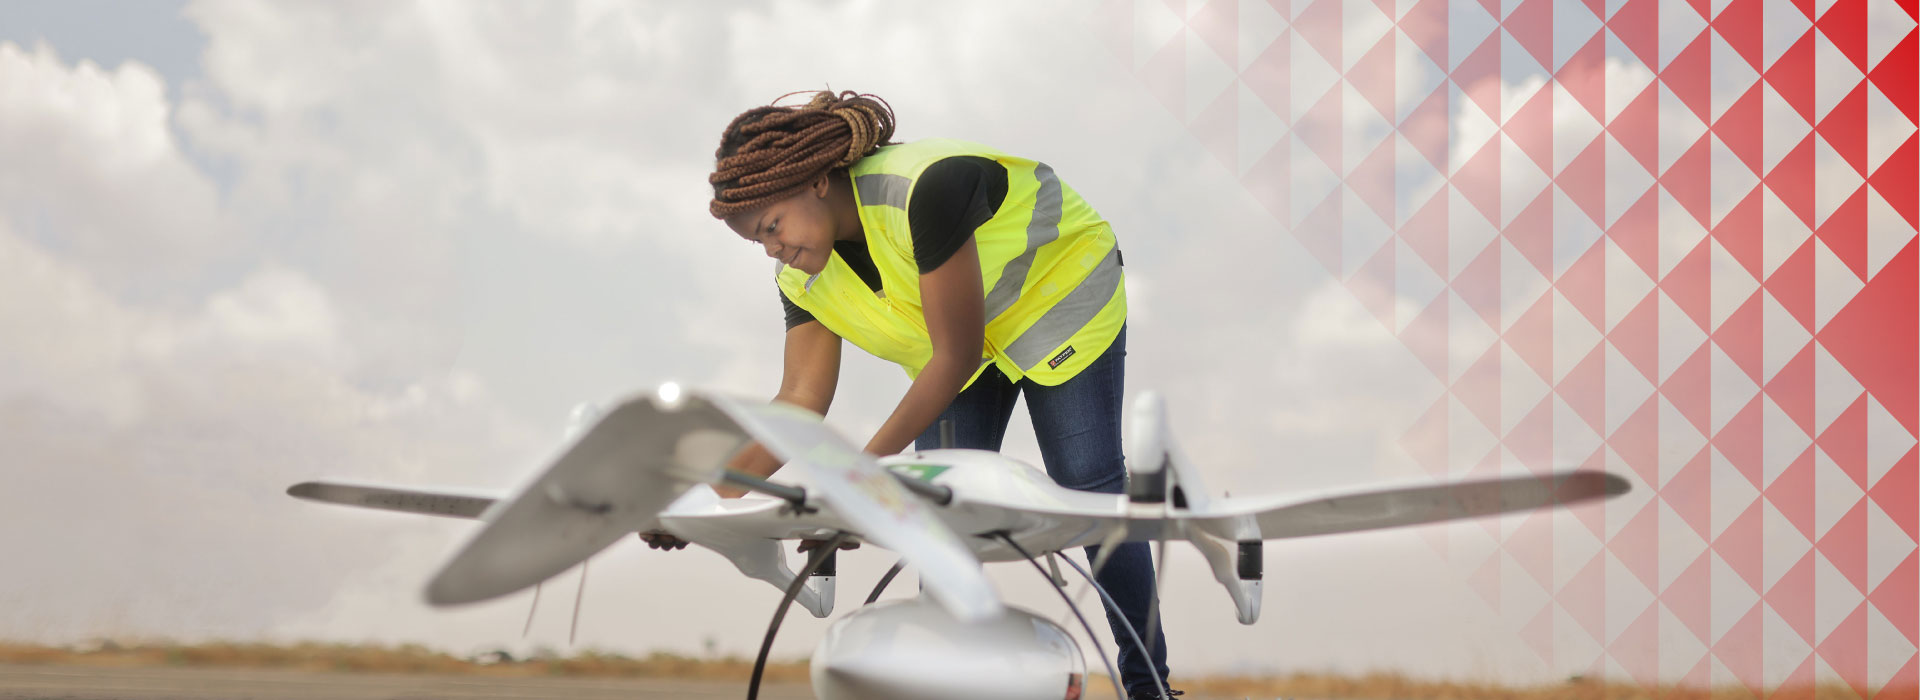 A woman in a high visibility vest is working on a drone.